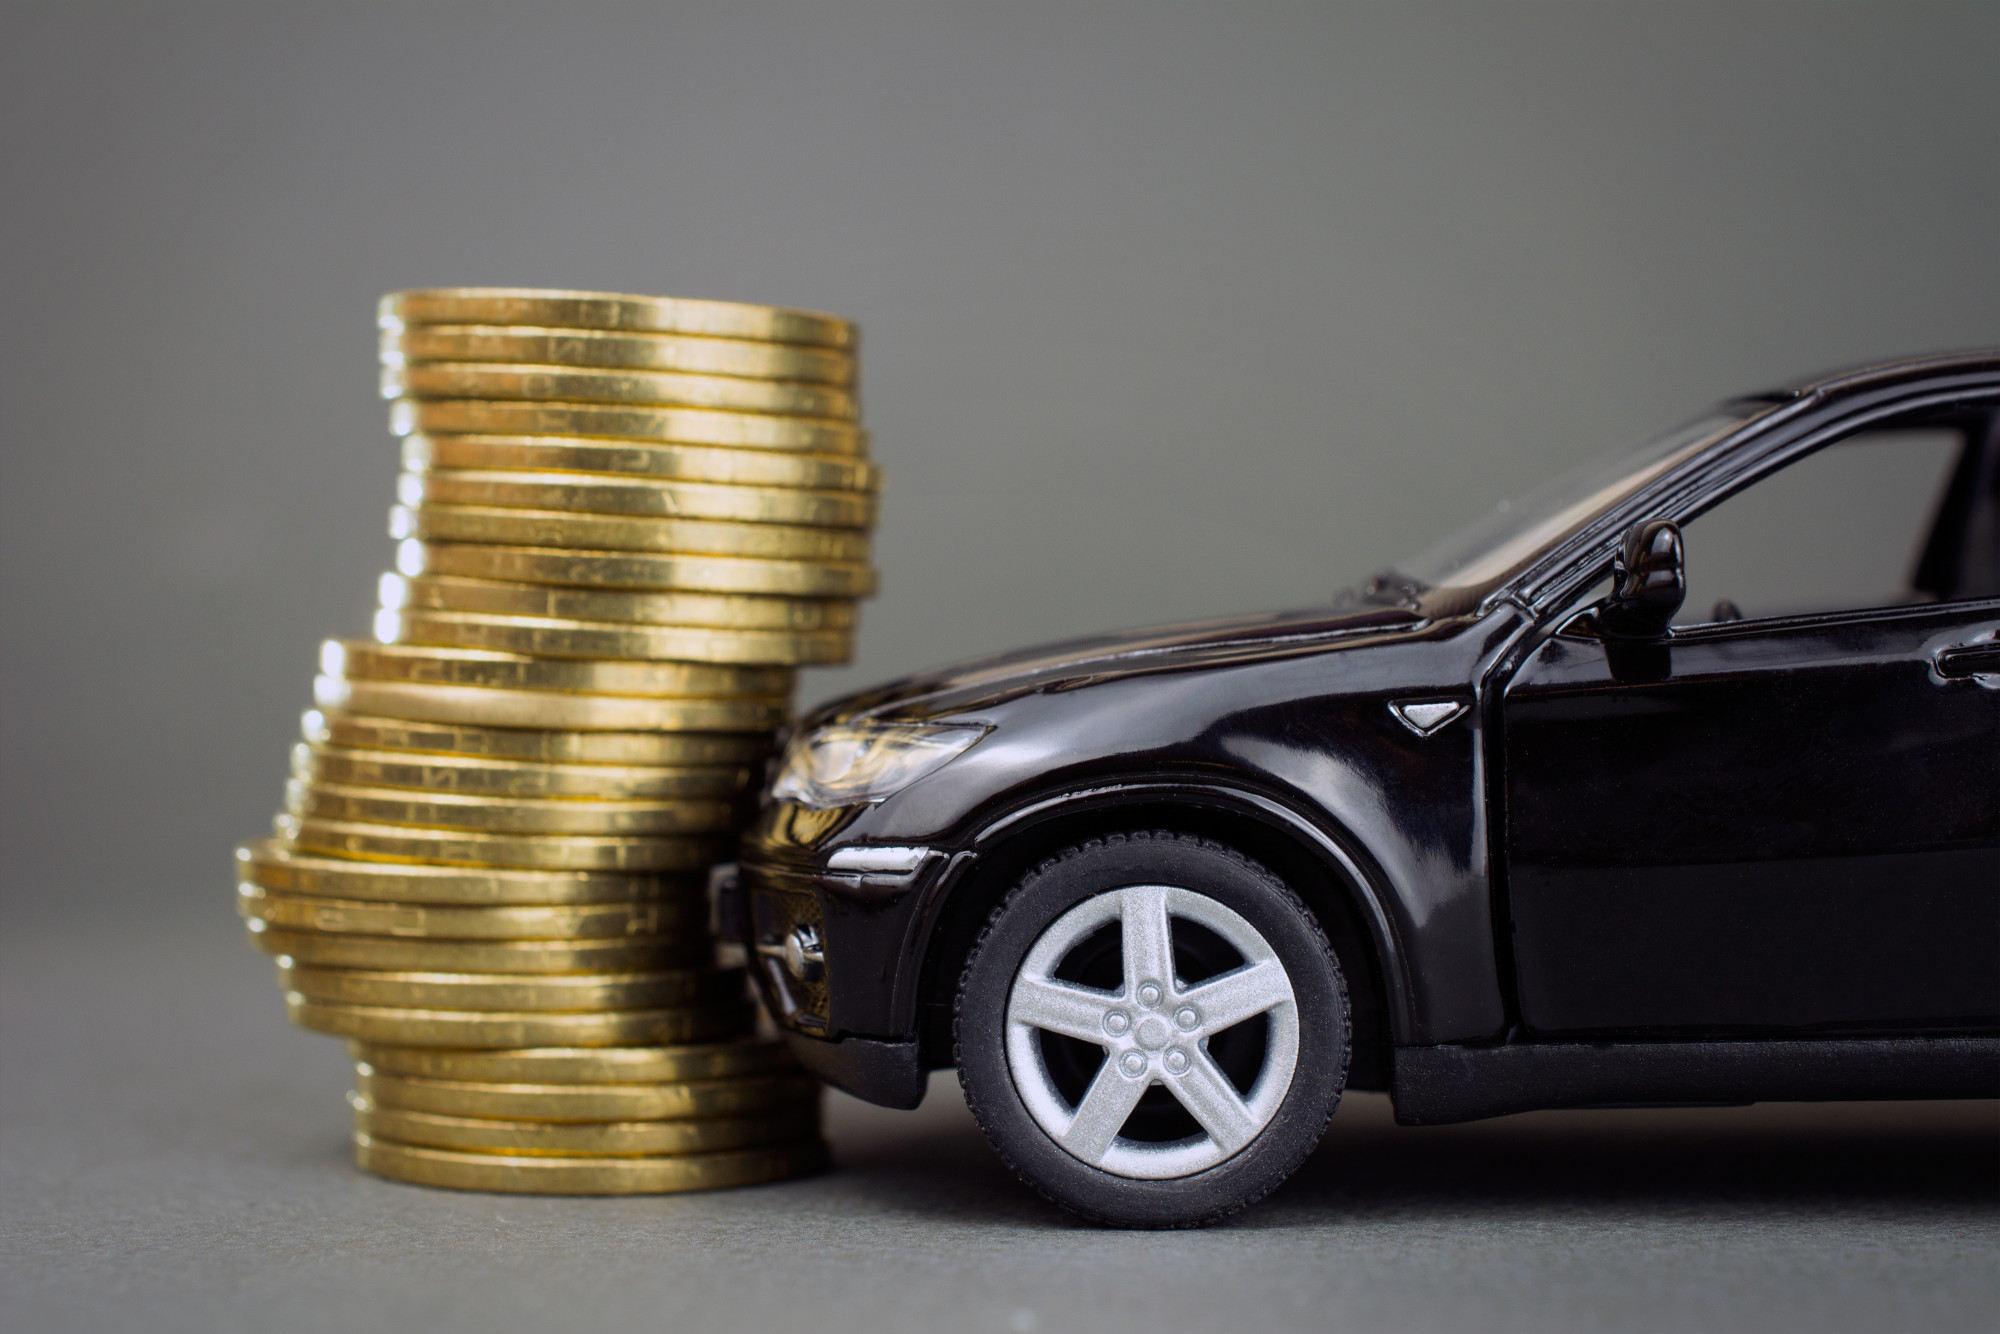 Consumer Proposal Auto Loan: Is It an Option Worth Considering?